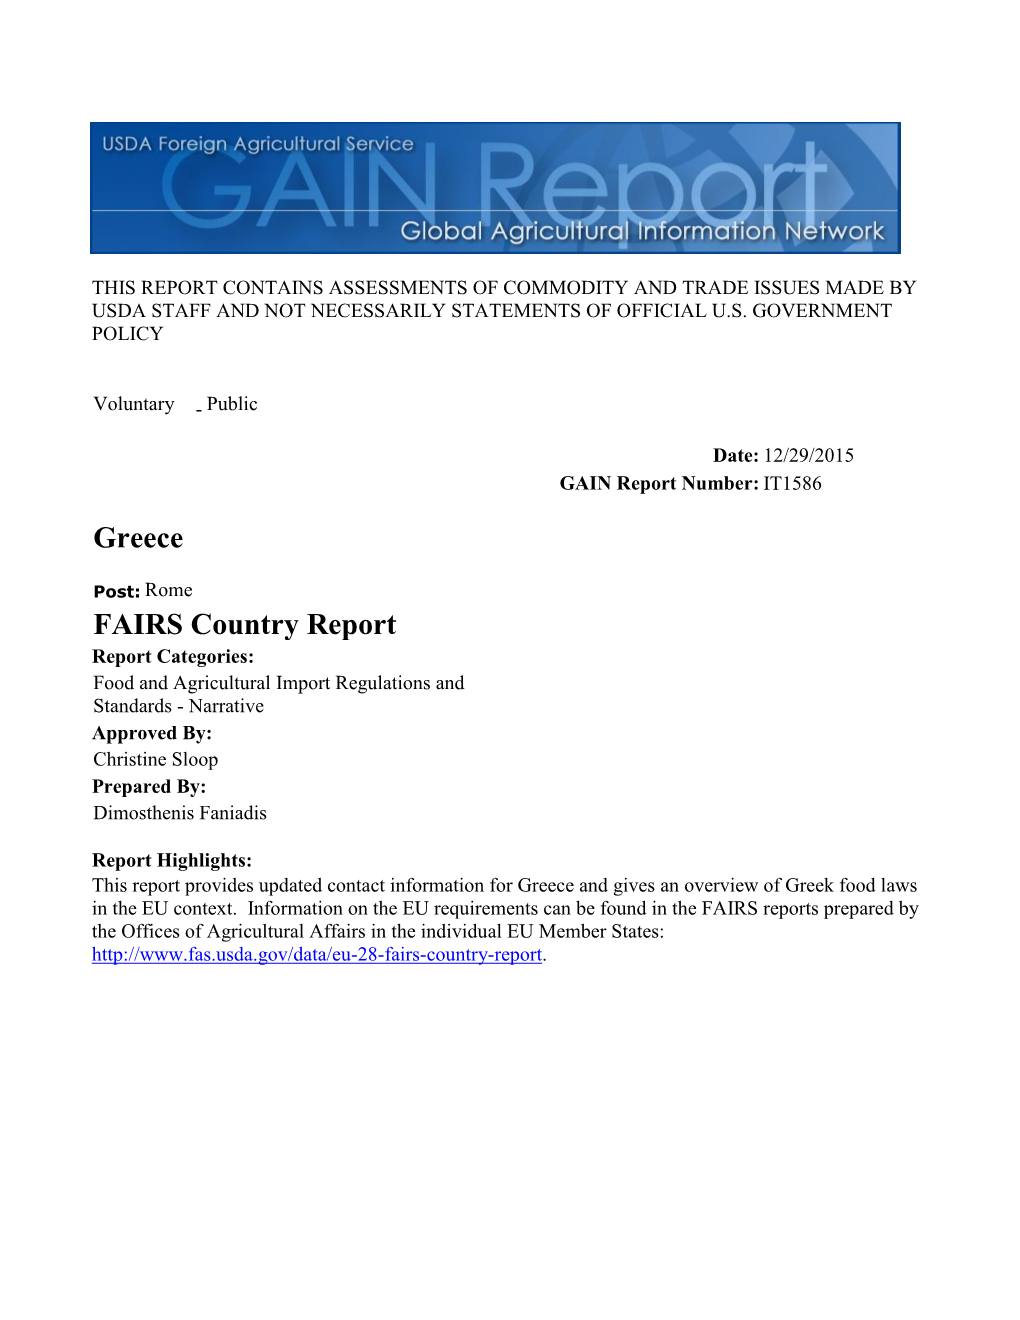 FAIRS Country Report Greece